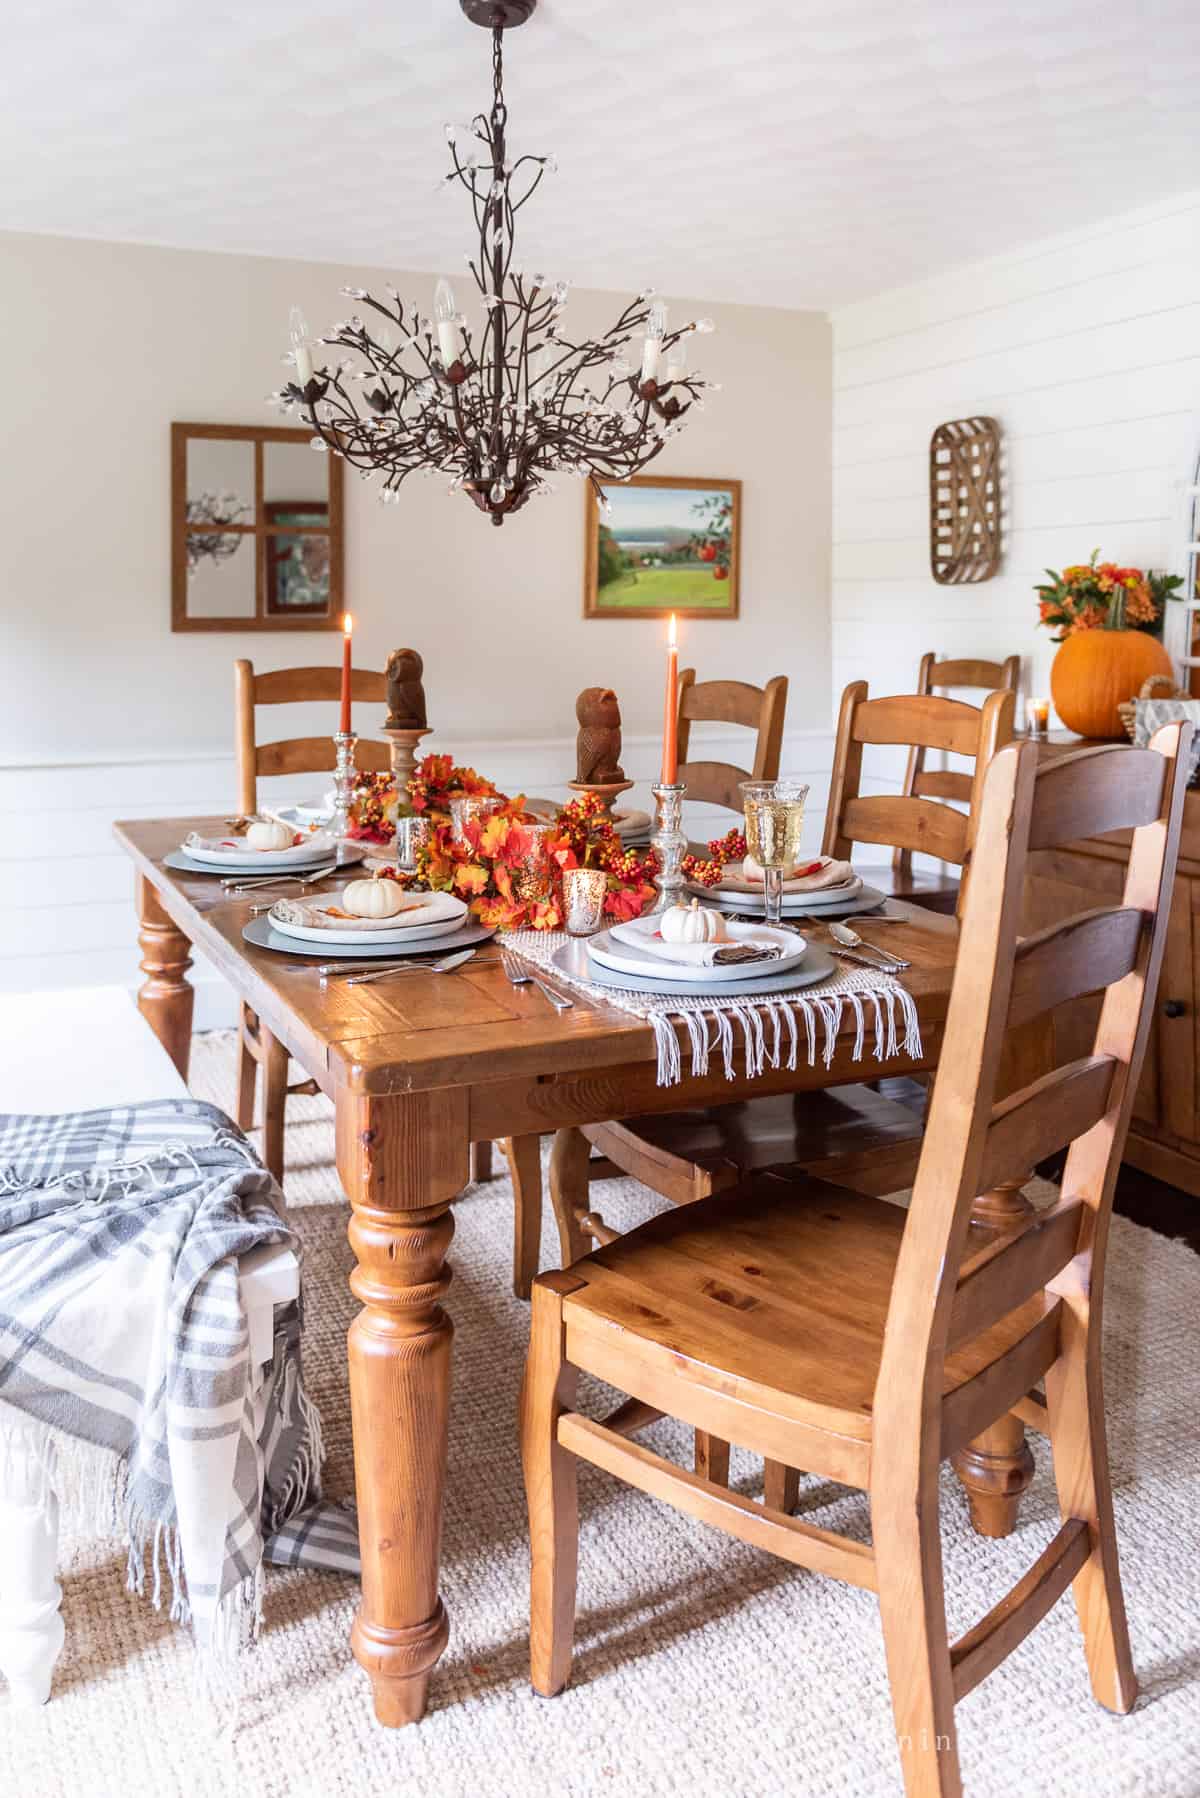 A dining room with a wooden table and chairs decorated with fall table decor.